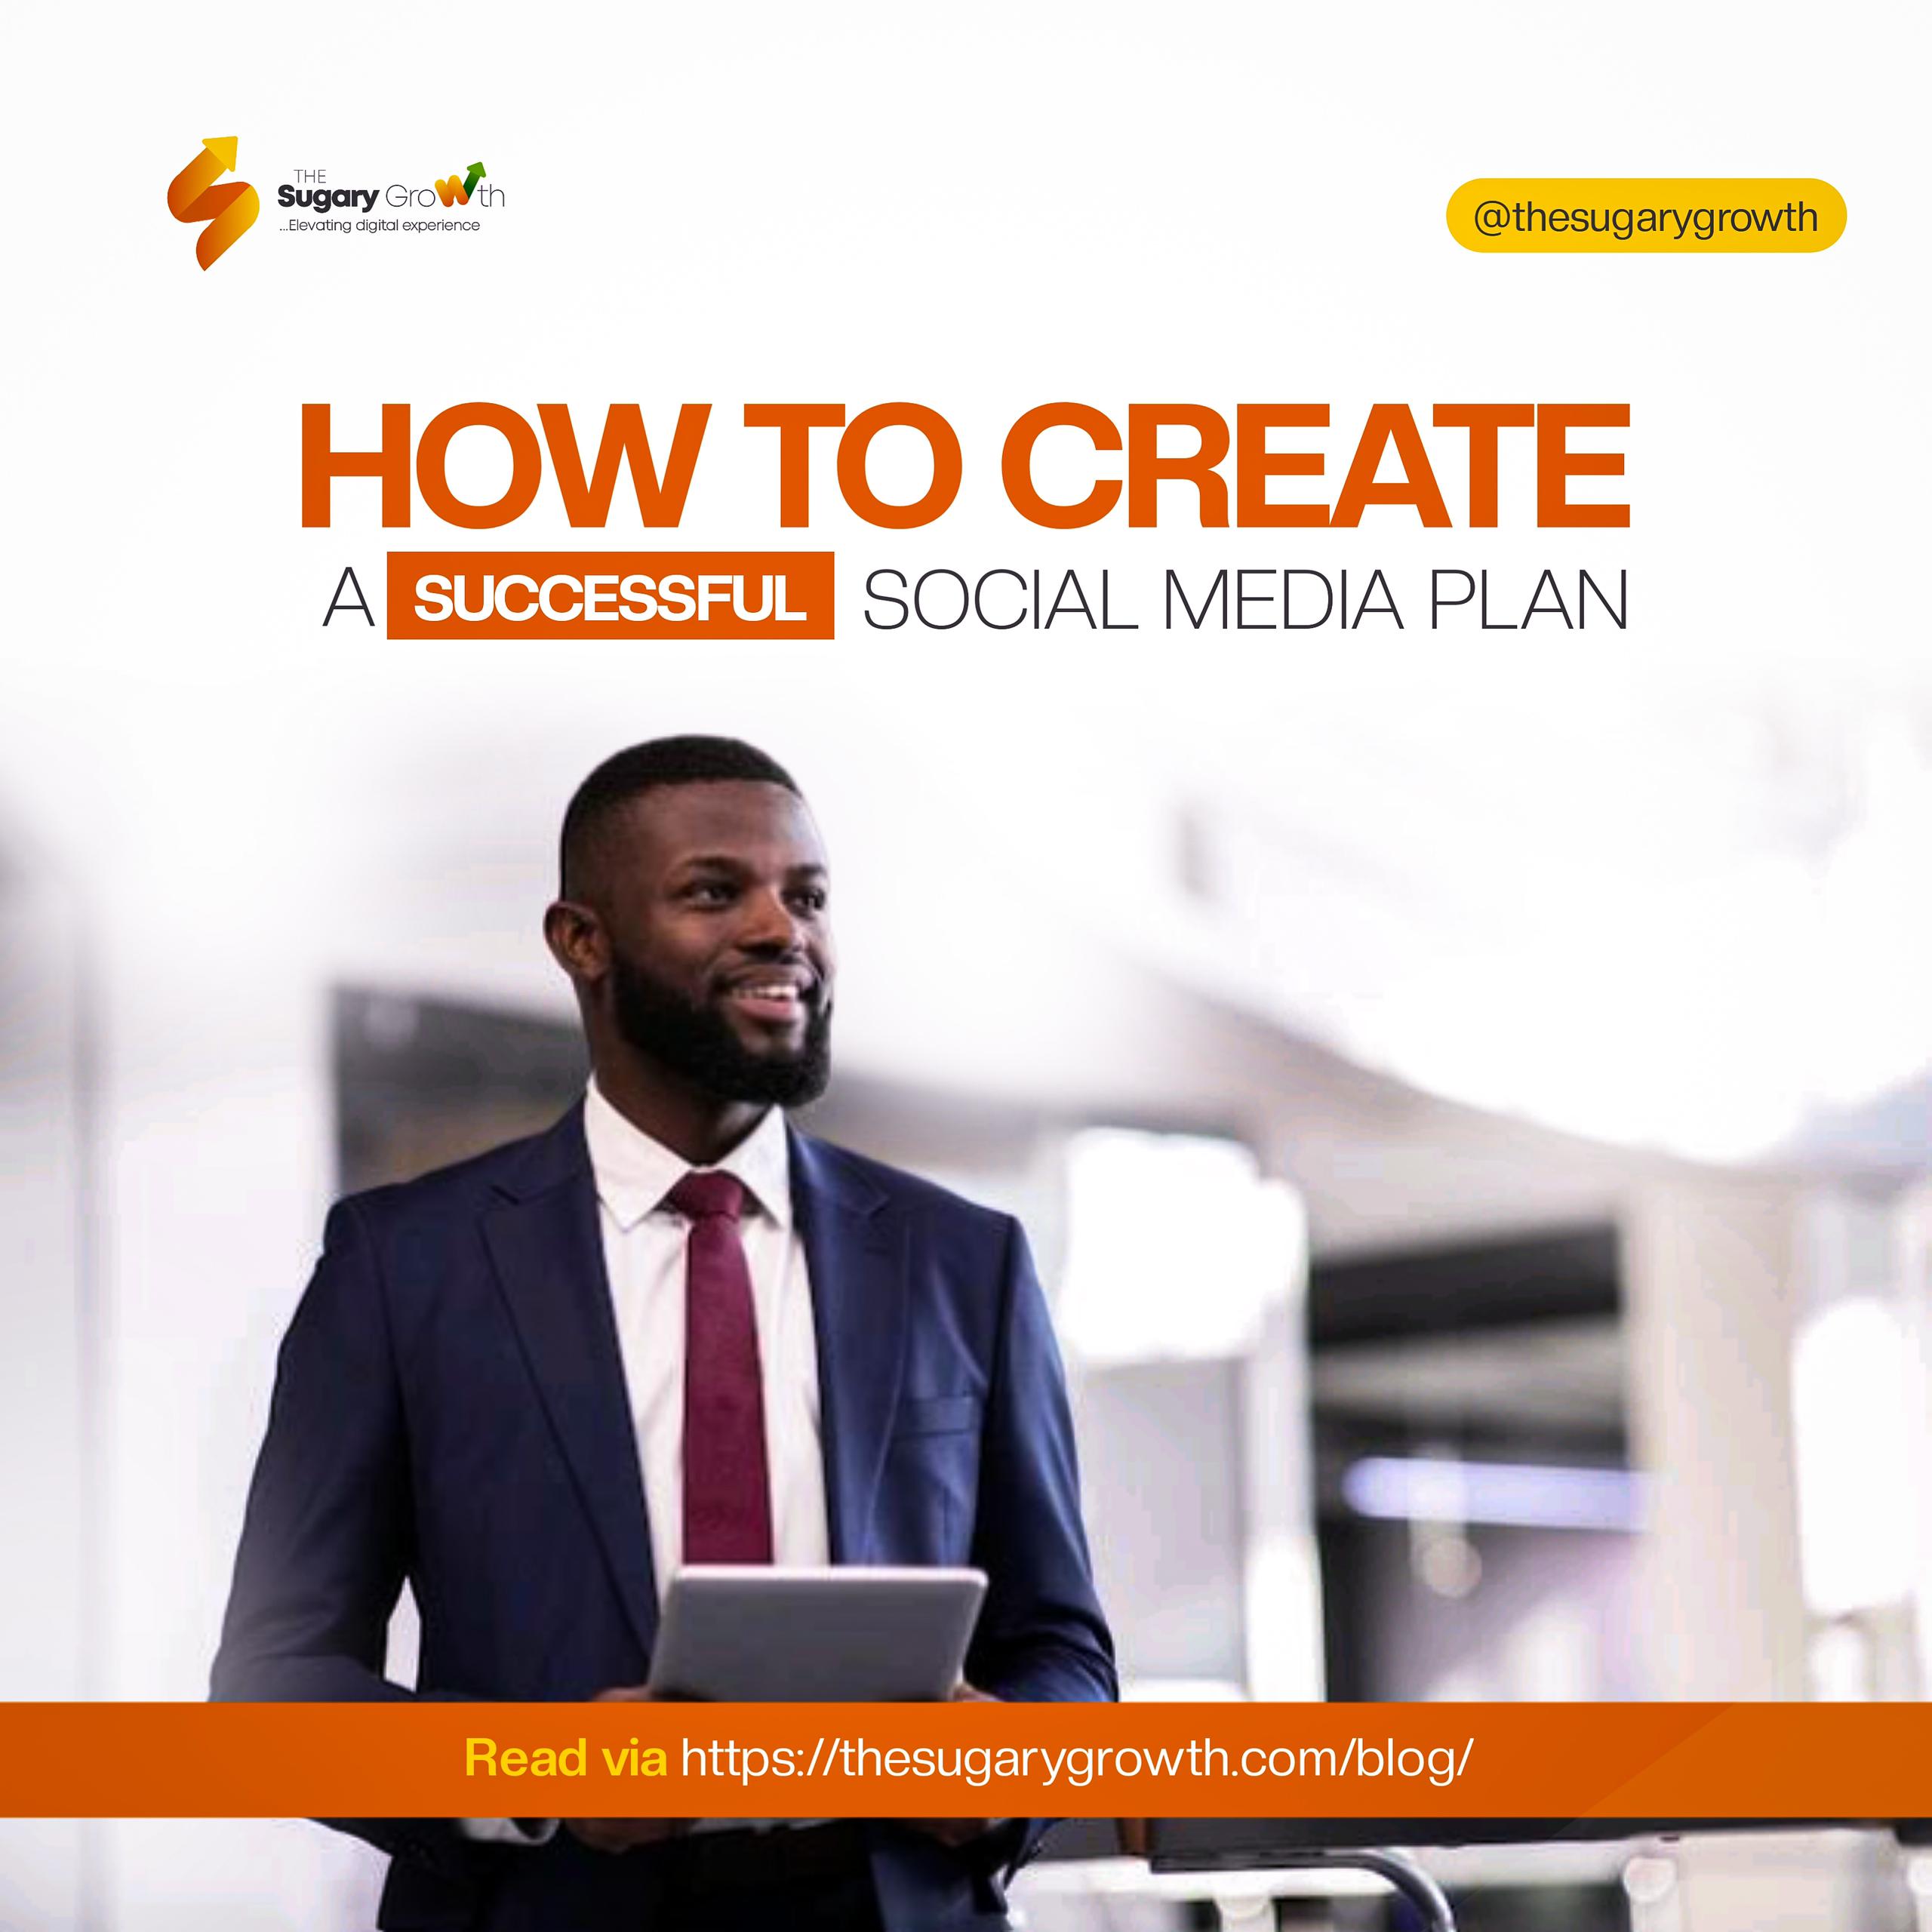 HOW TO CREATE A SUCCESSFUL SOCIAL MEDIA PLAN